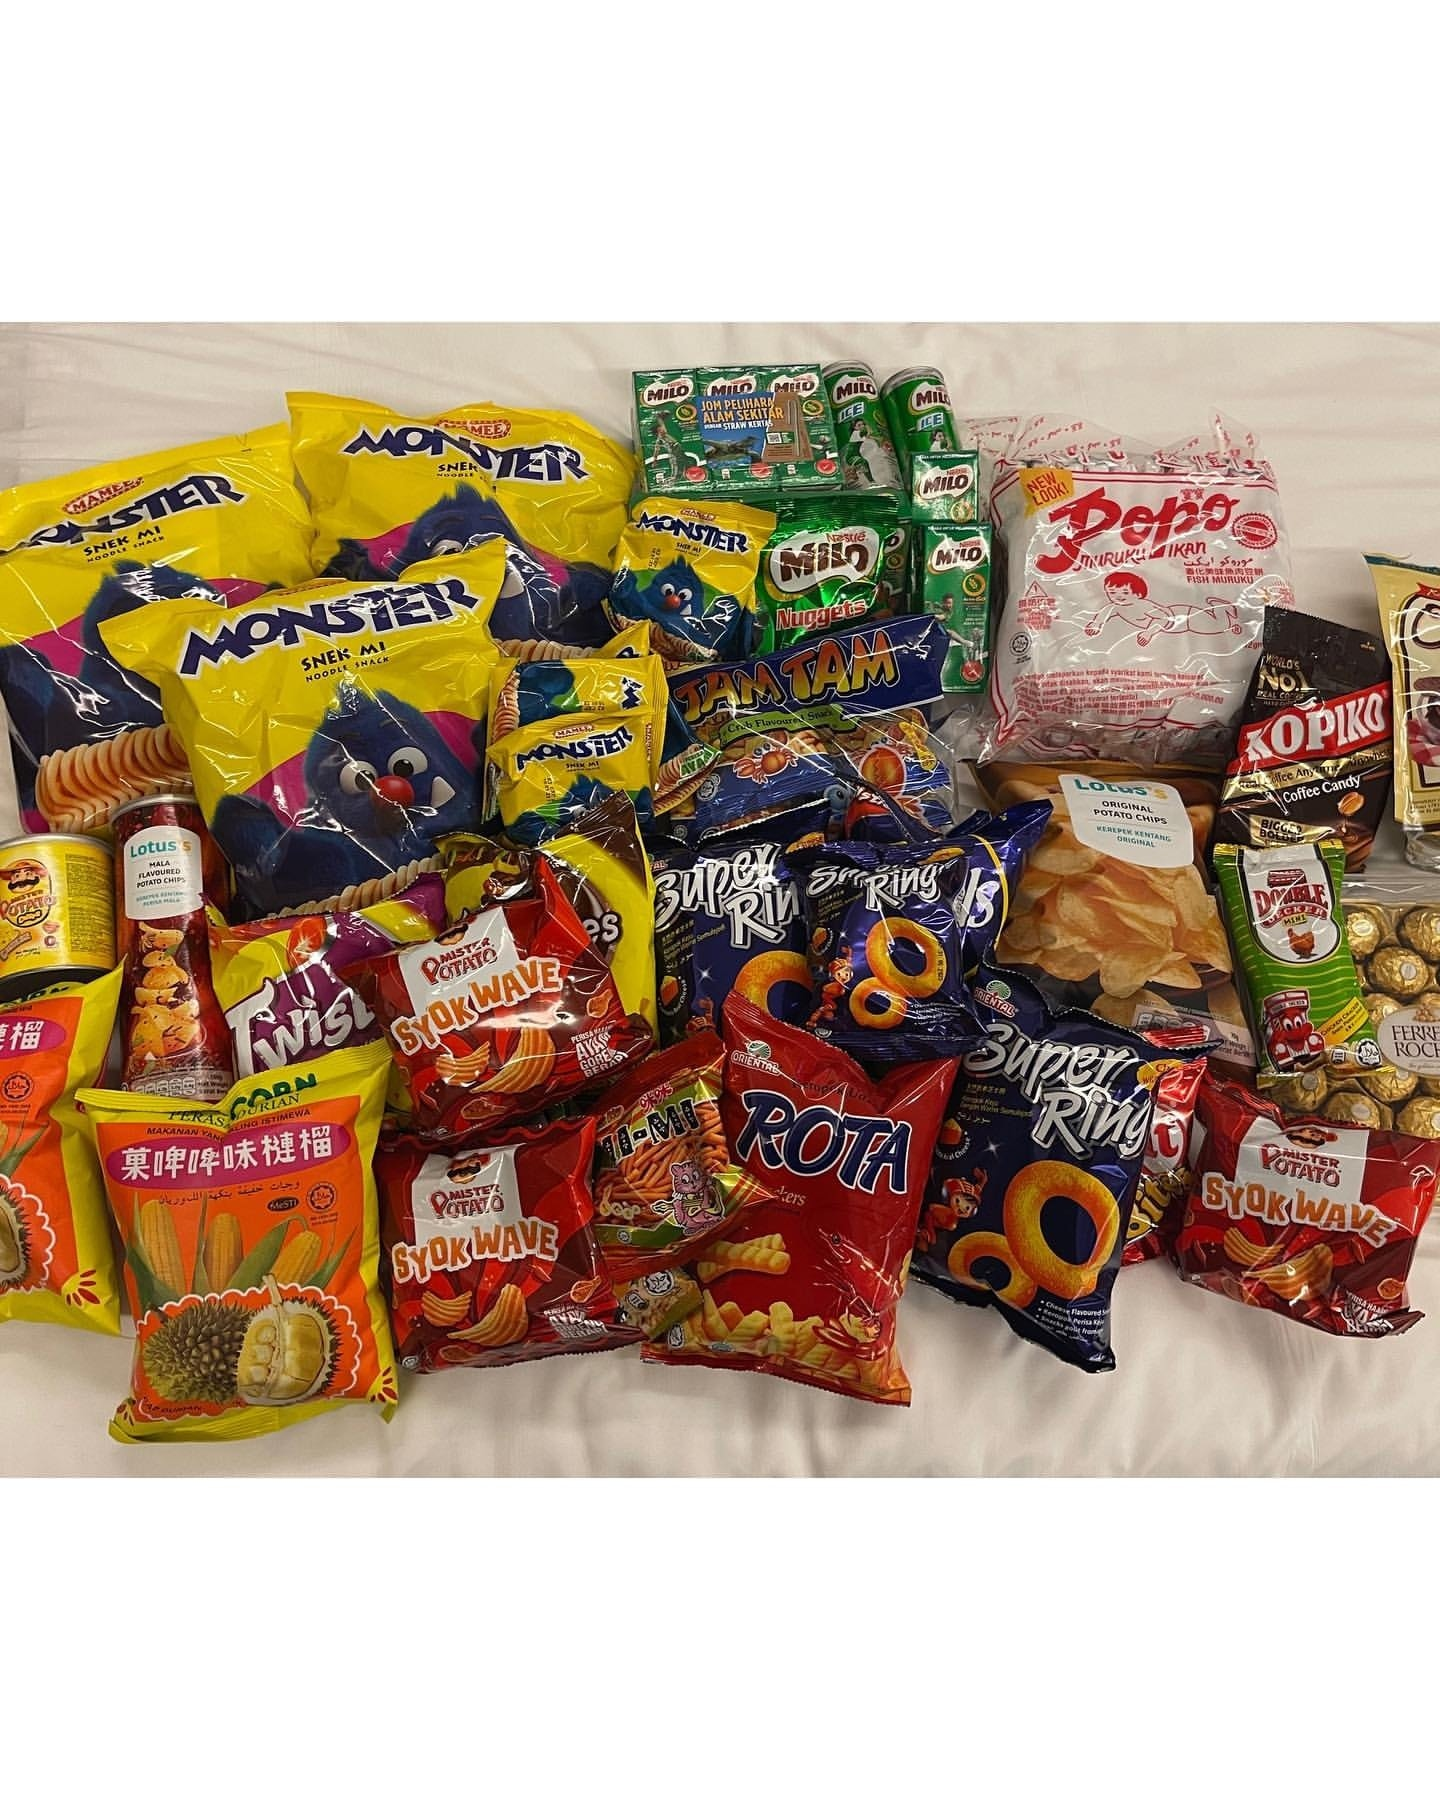 M'sian badminton fans shower chinese women singles player chen yu fei with local snacks and gifts | weirdkaya